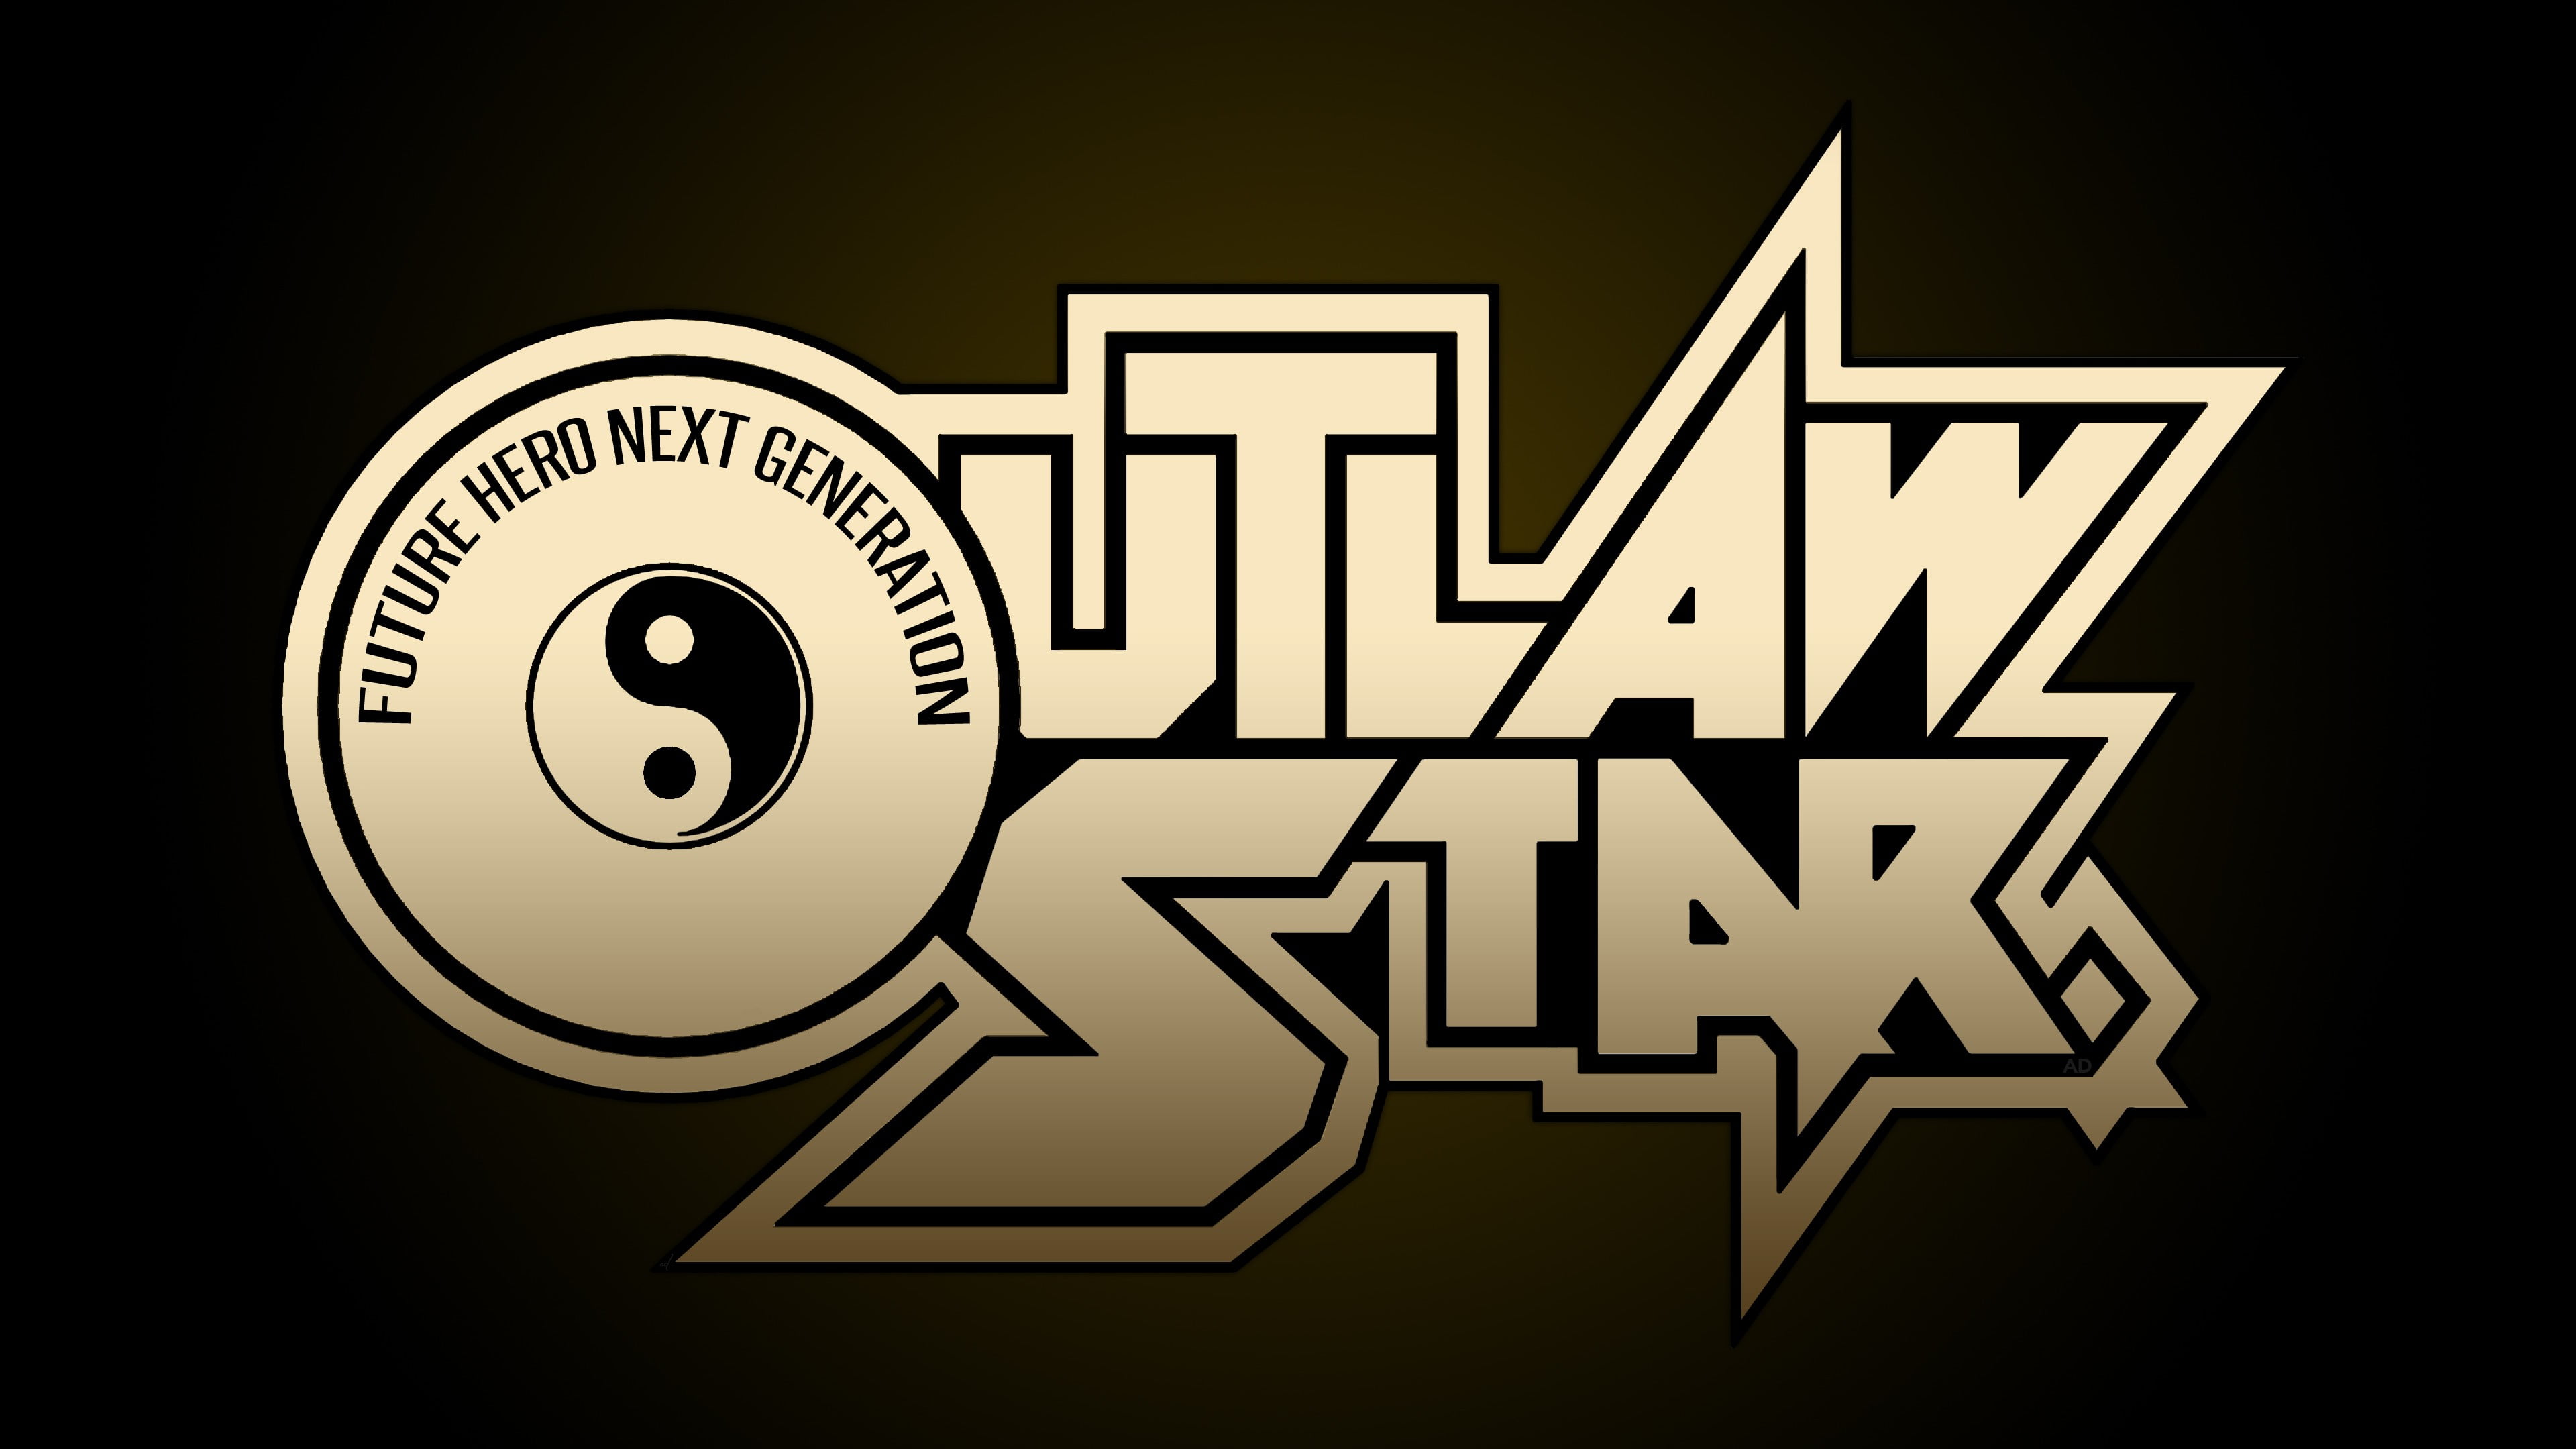 Outlaw Star logo, typography, gradient, Outlaw Star, anime